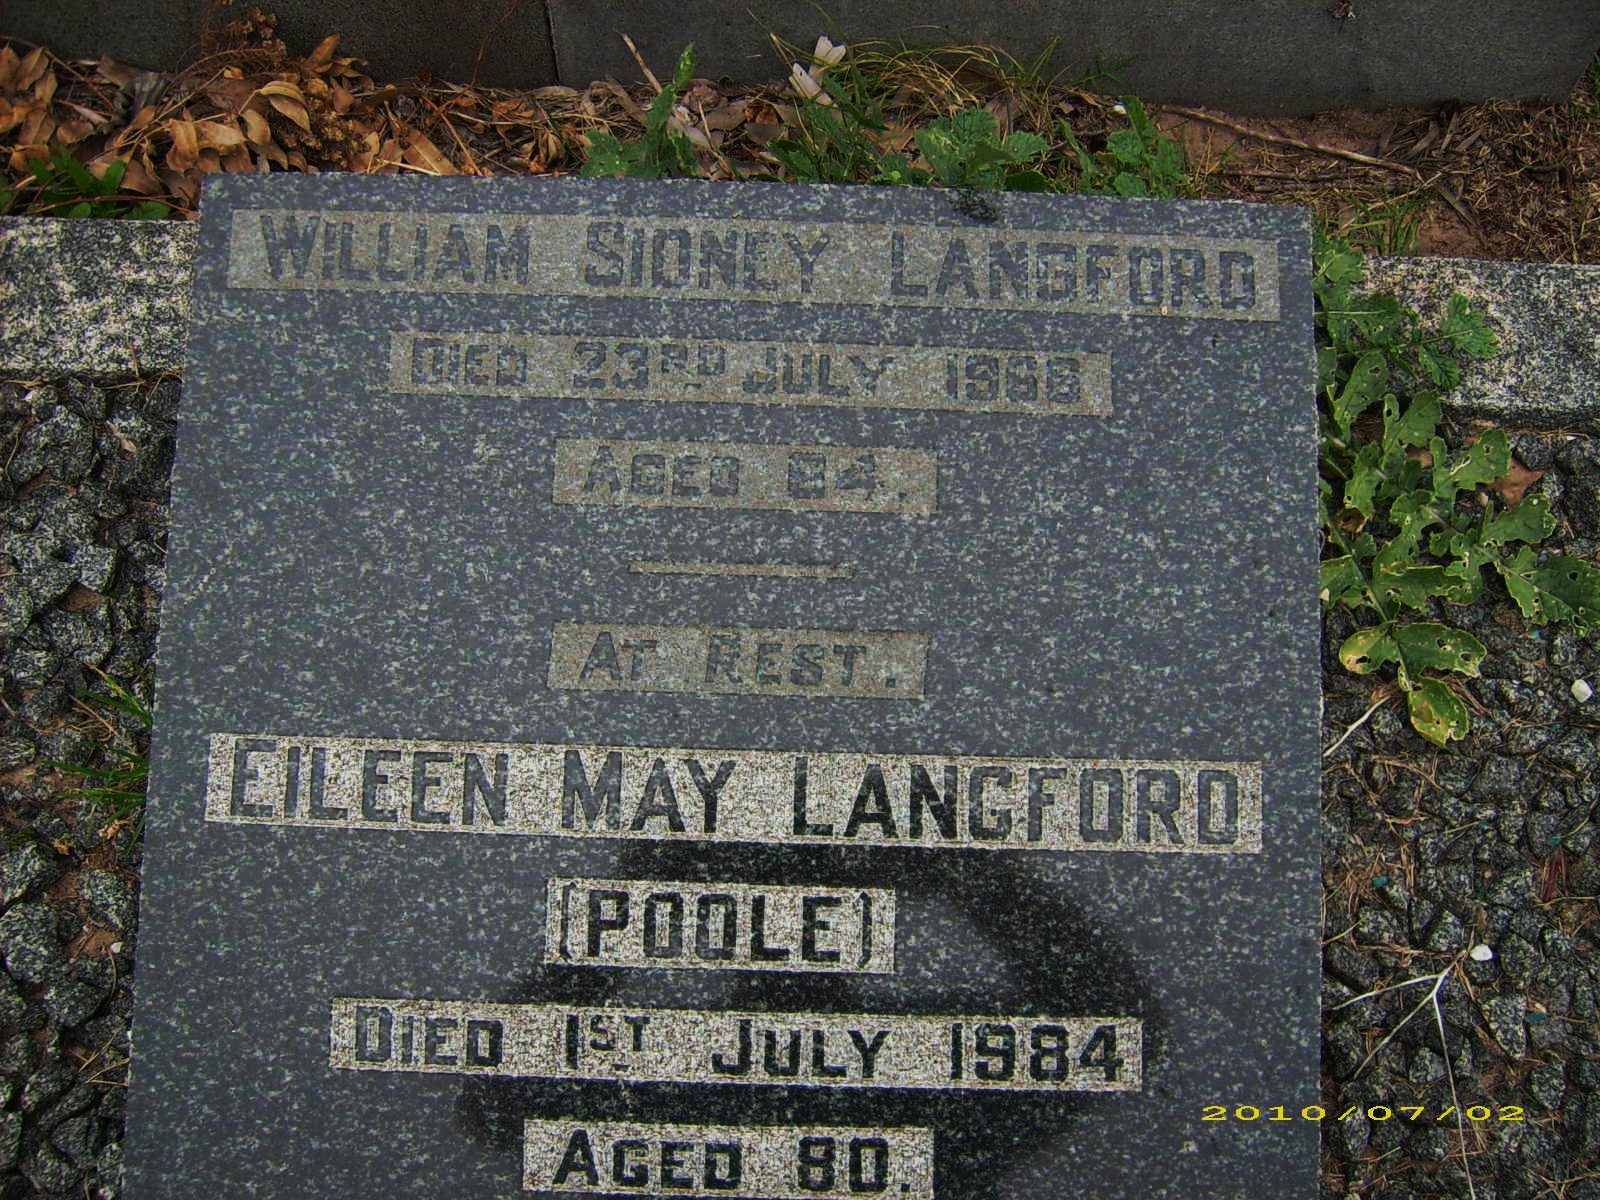 LANGFORD William Sidney -1968 :: LANGFORD Eileen May POOLE -1984